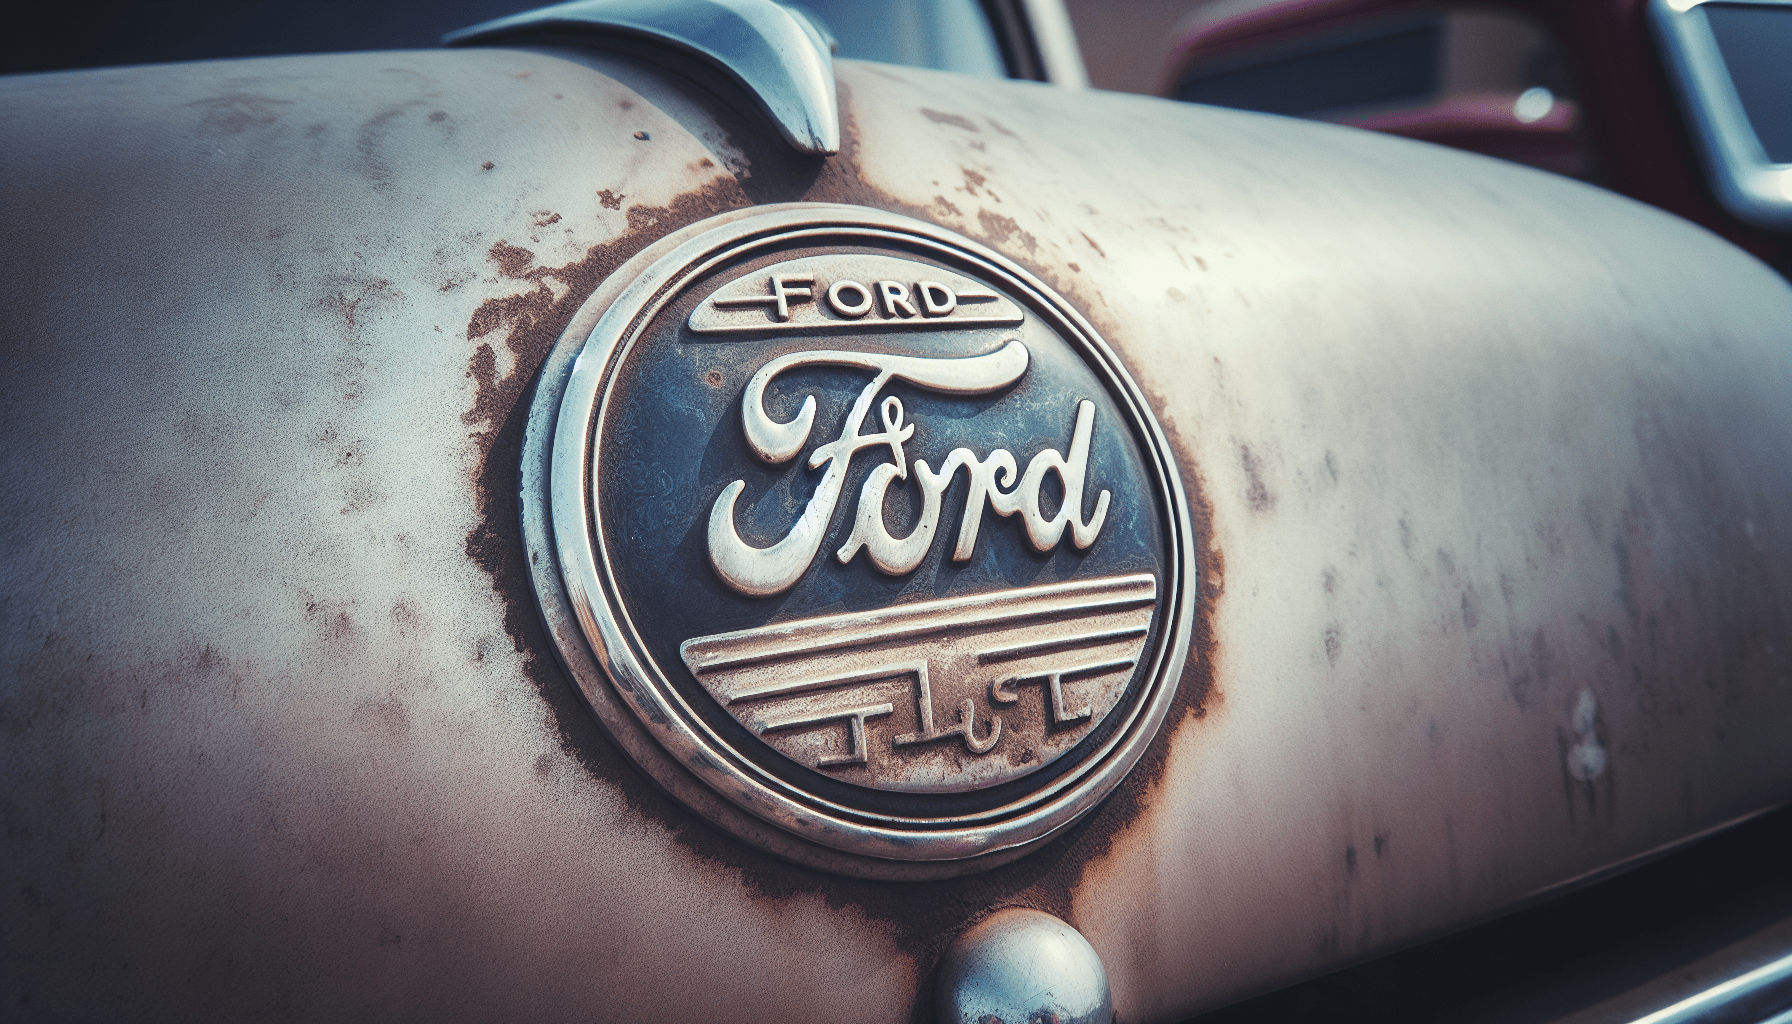 Why Is Ford Discontinued?